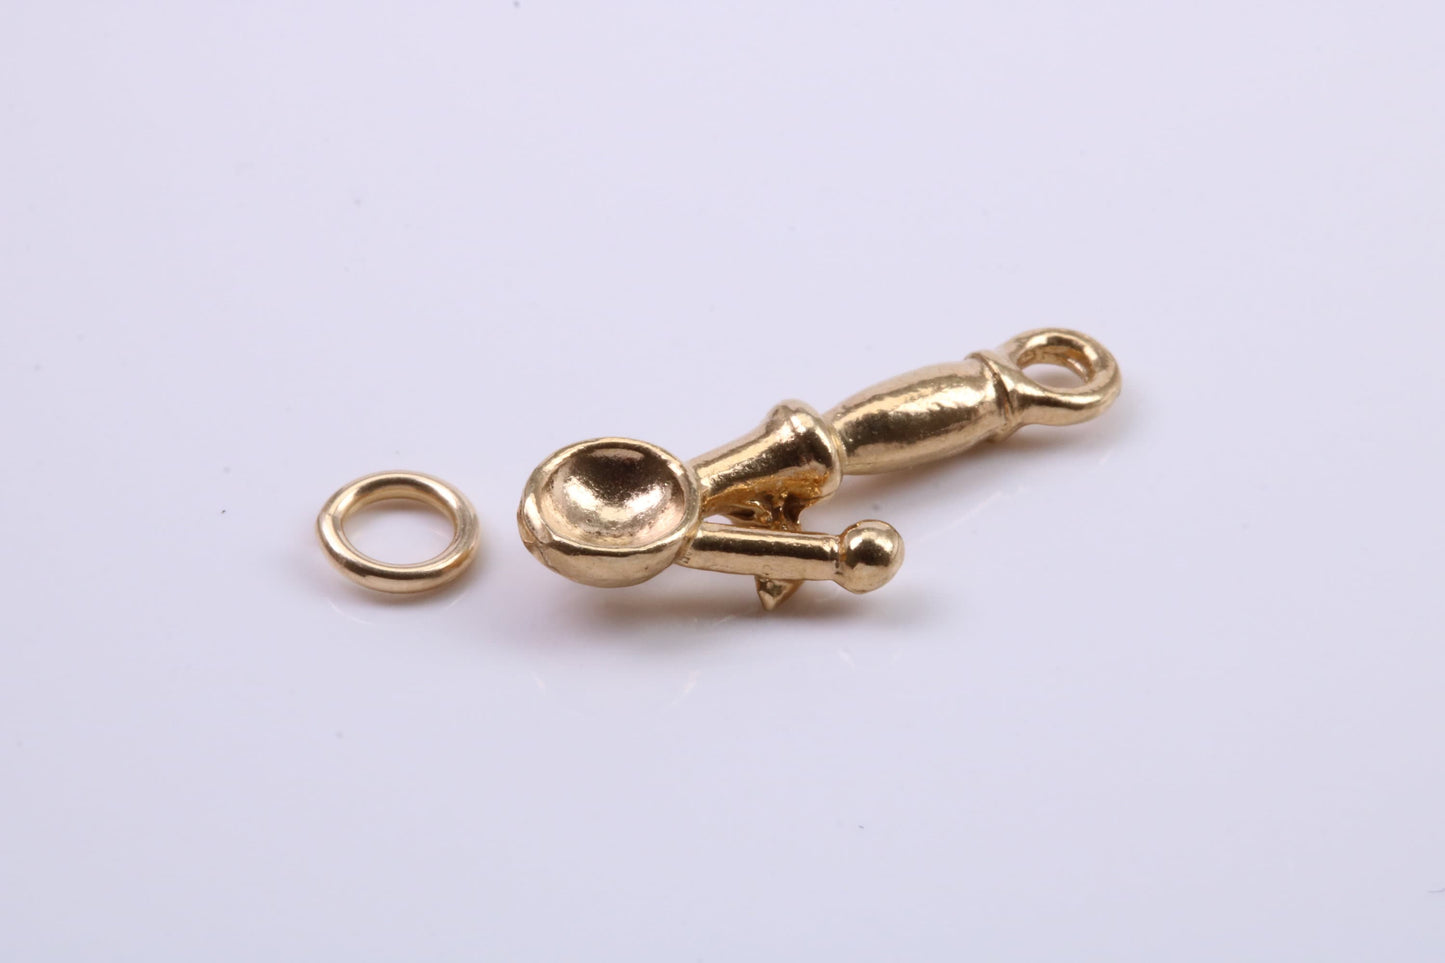 Ice Cream Scooper Charm, Traditional Charm, Made from Solid 9ct Yellow Gold, British Hallmarked, Complete with Attachment Link